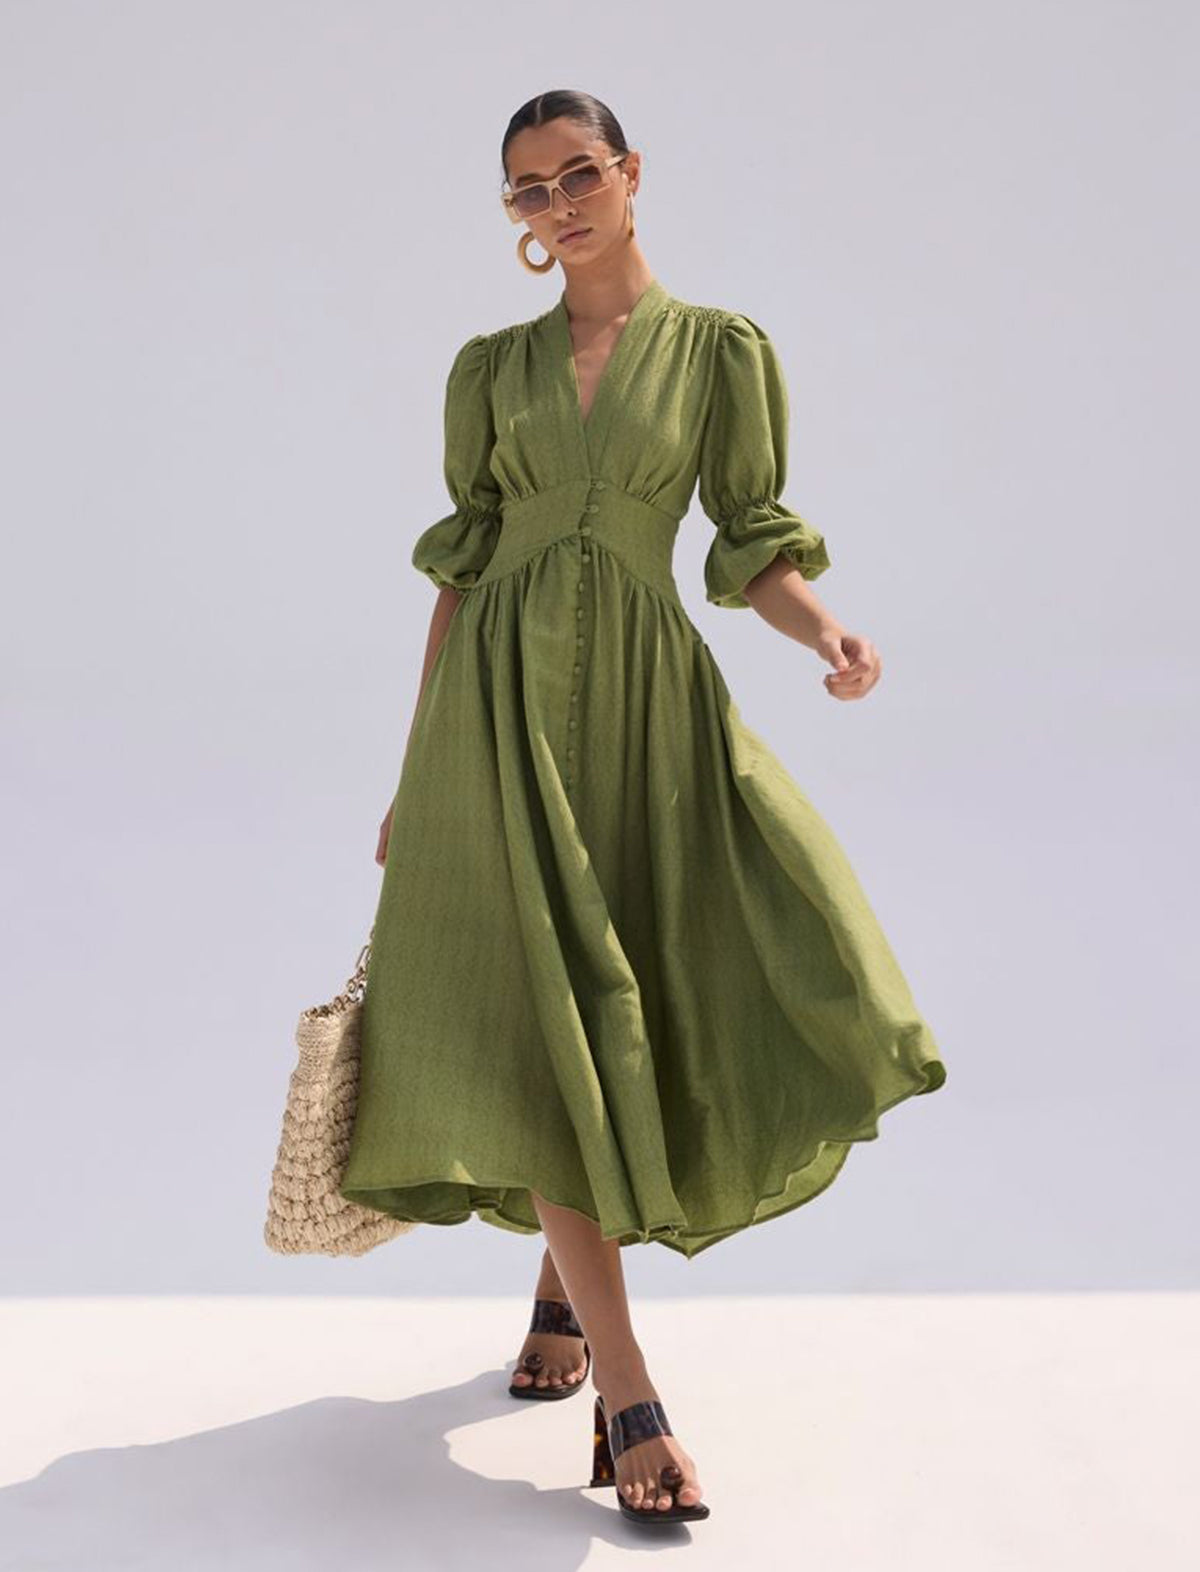 CULT GAIA Willow Linen Dress in Palm